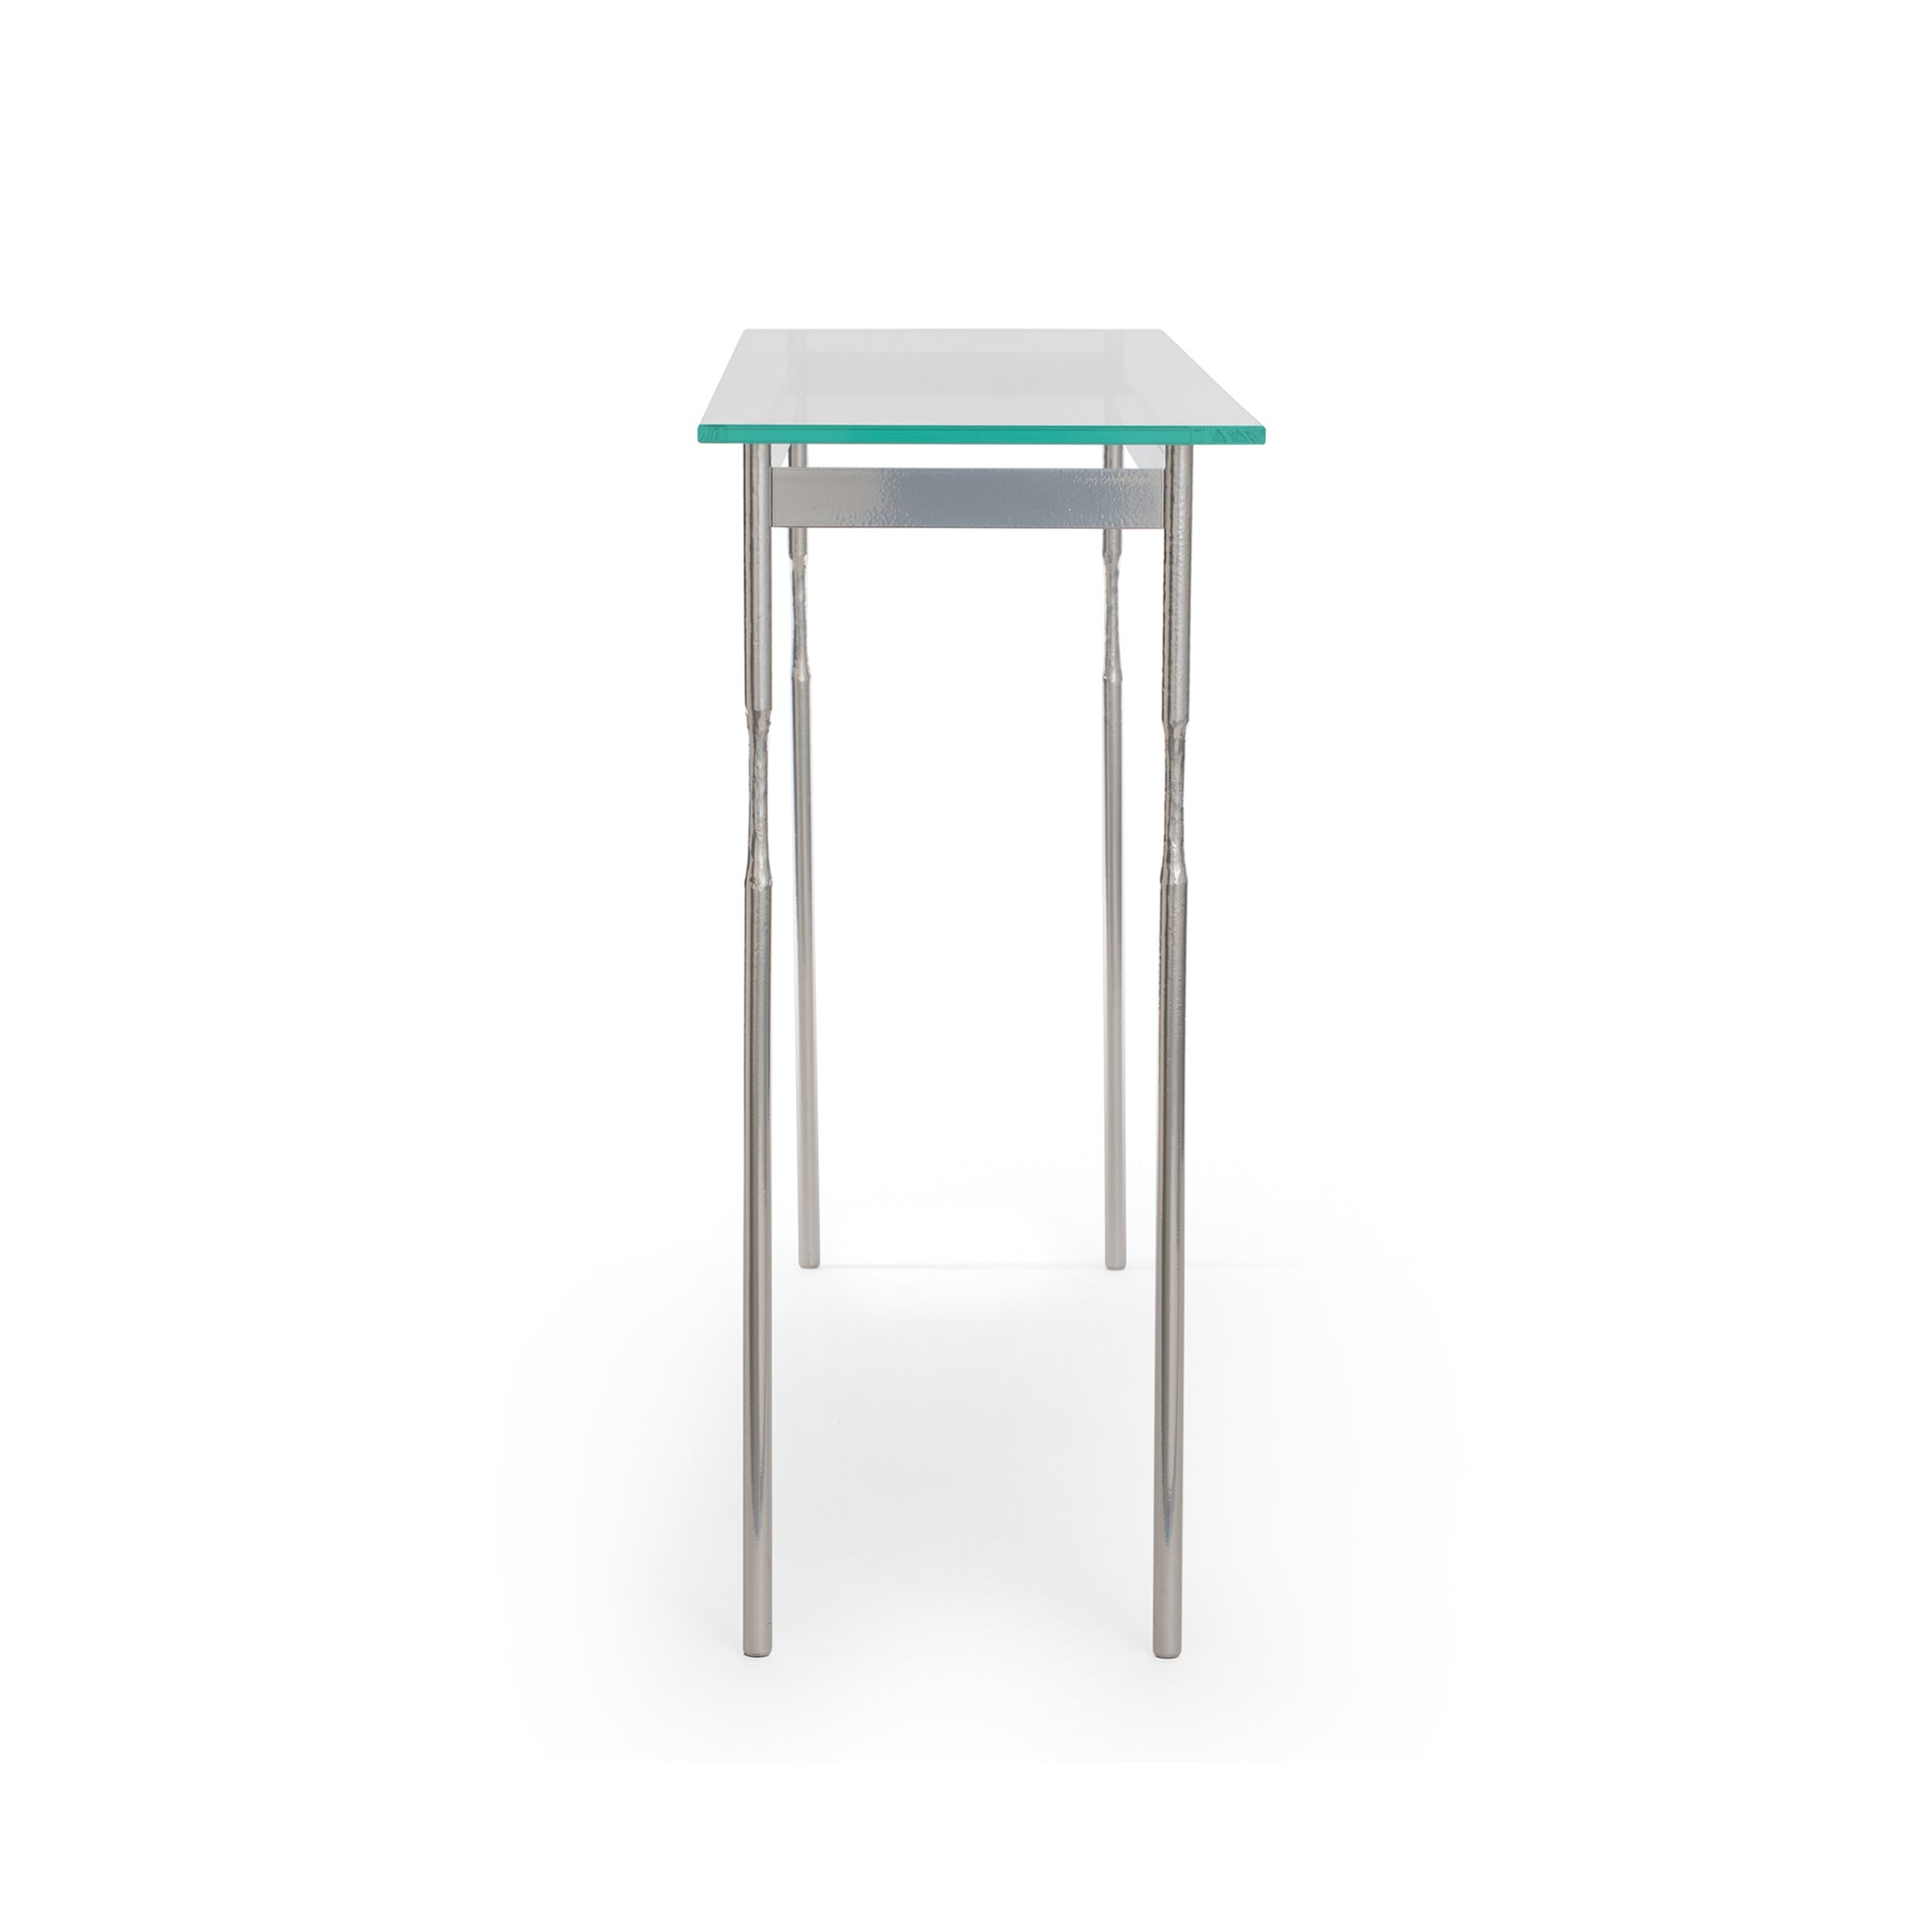 A Senza Console Table with metal legs and a tempered glass top by Hubbardton Forge.